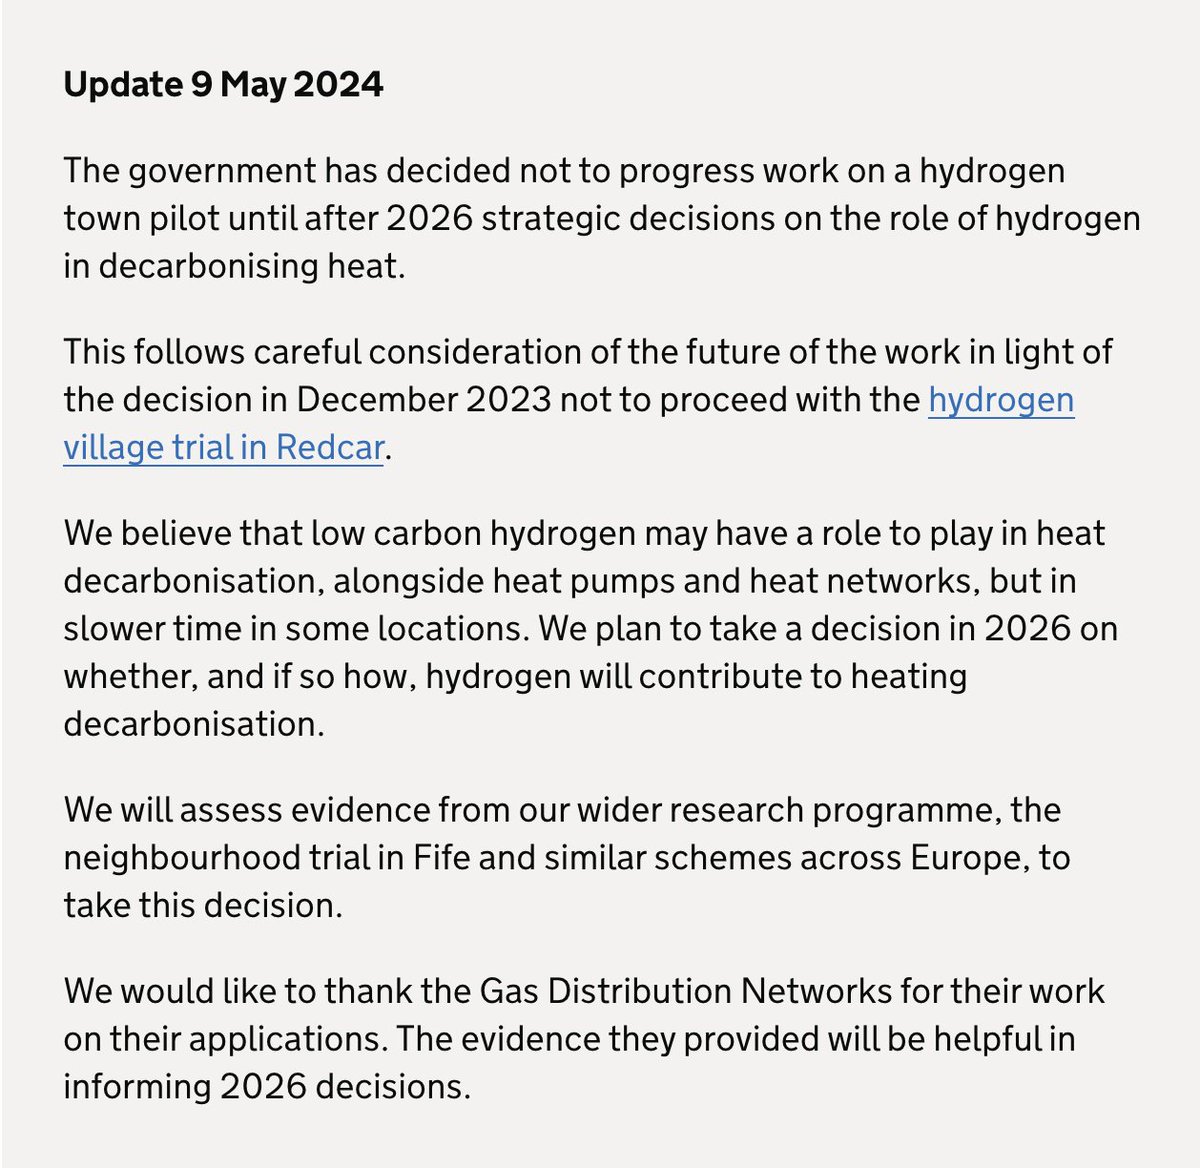 Another big blow for hydrogen heat as UK govt scraps plans for a 'hydrogen town' trial of 10,000 homes Follows decisions last yr to scrap 2,000-home 'hydrogen village' trials in Redcar & Ellesmere Port (No independent studies back hydrogen heat anyway) gov.uk/government/pub…